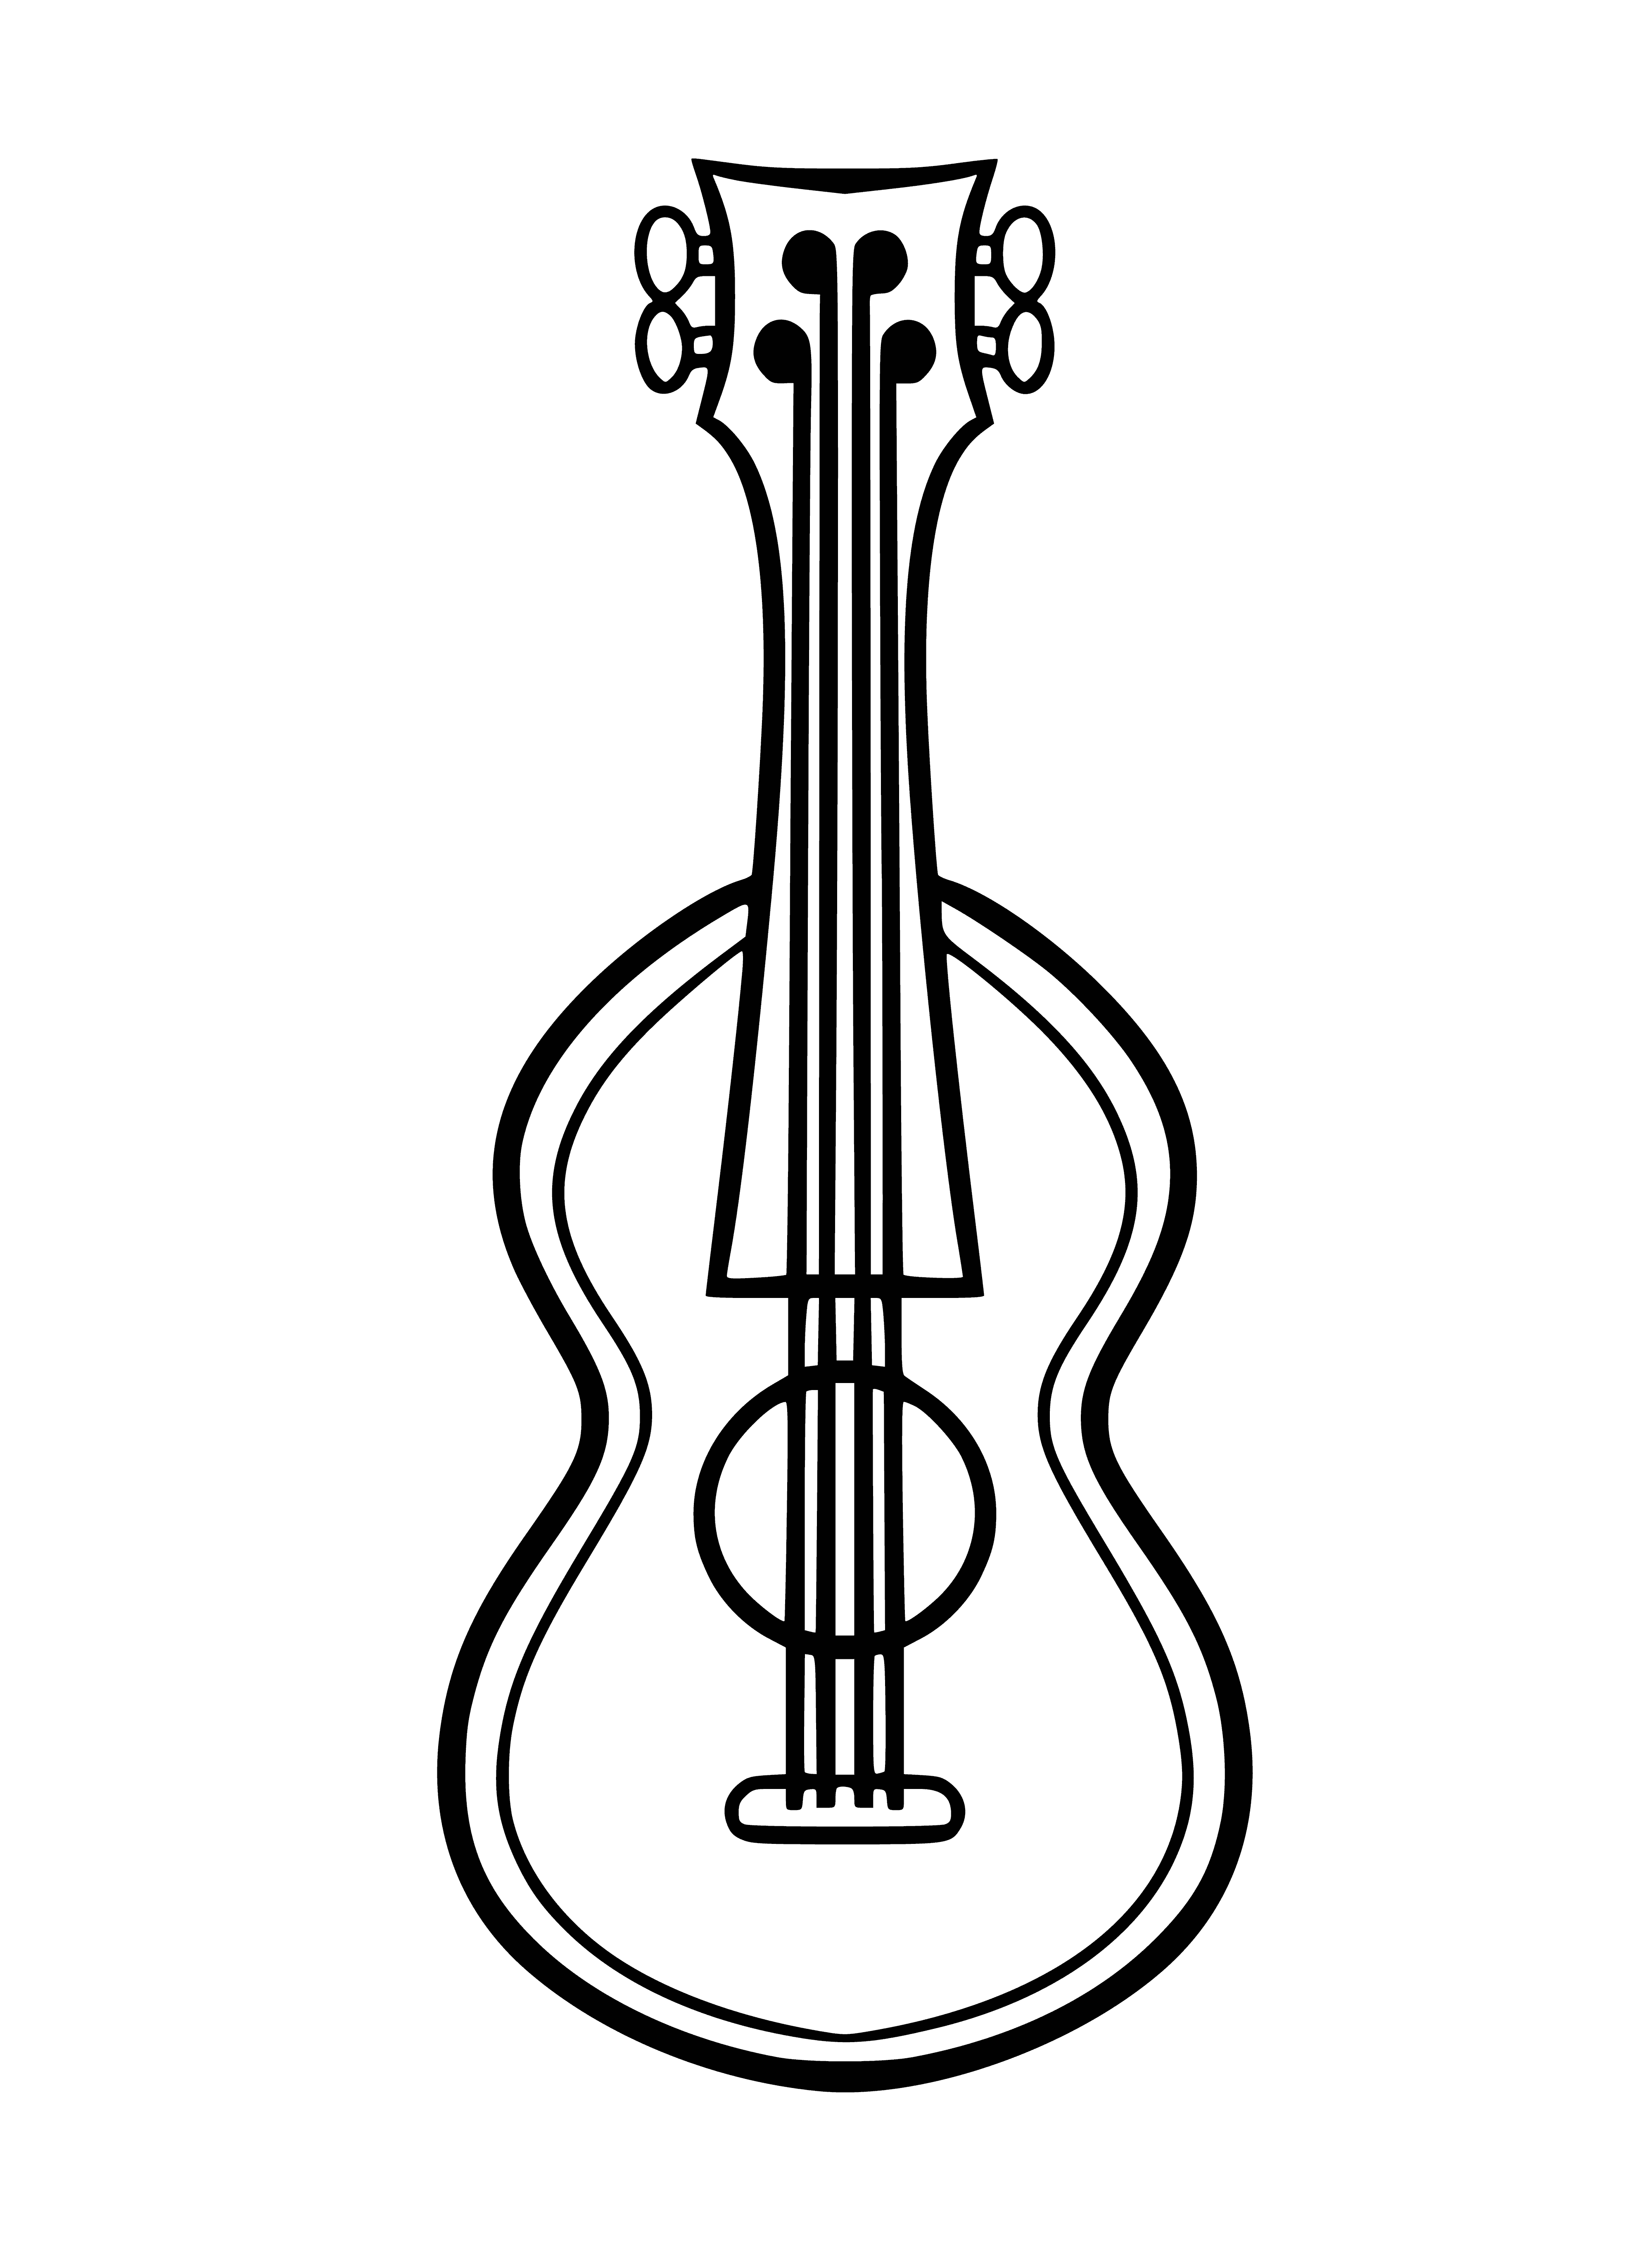 coloring page: Small instrument with four-strings, played by strumming/plucking and changing pitch by pressing on frets with left hand. #ukulele